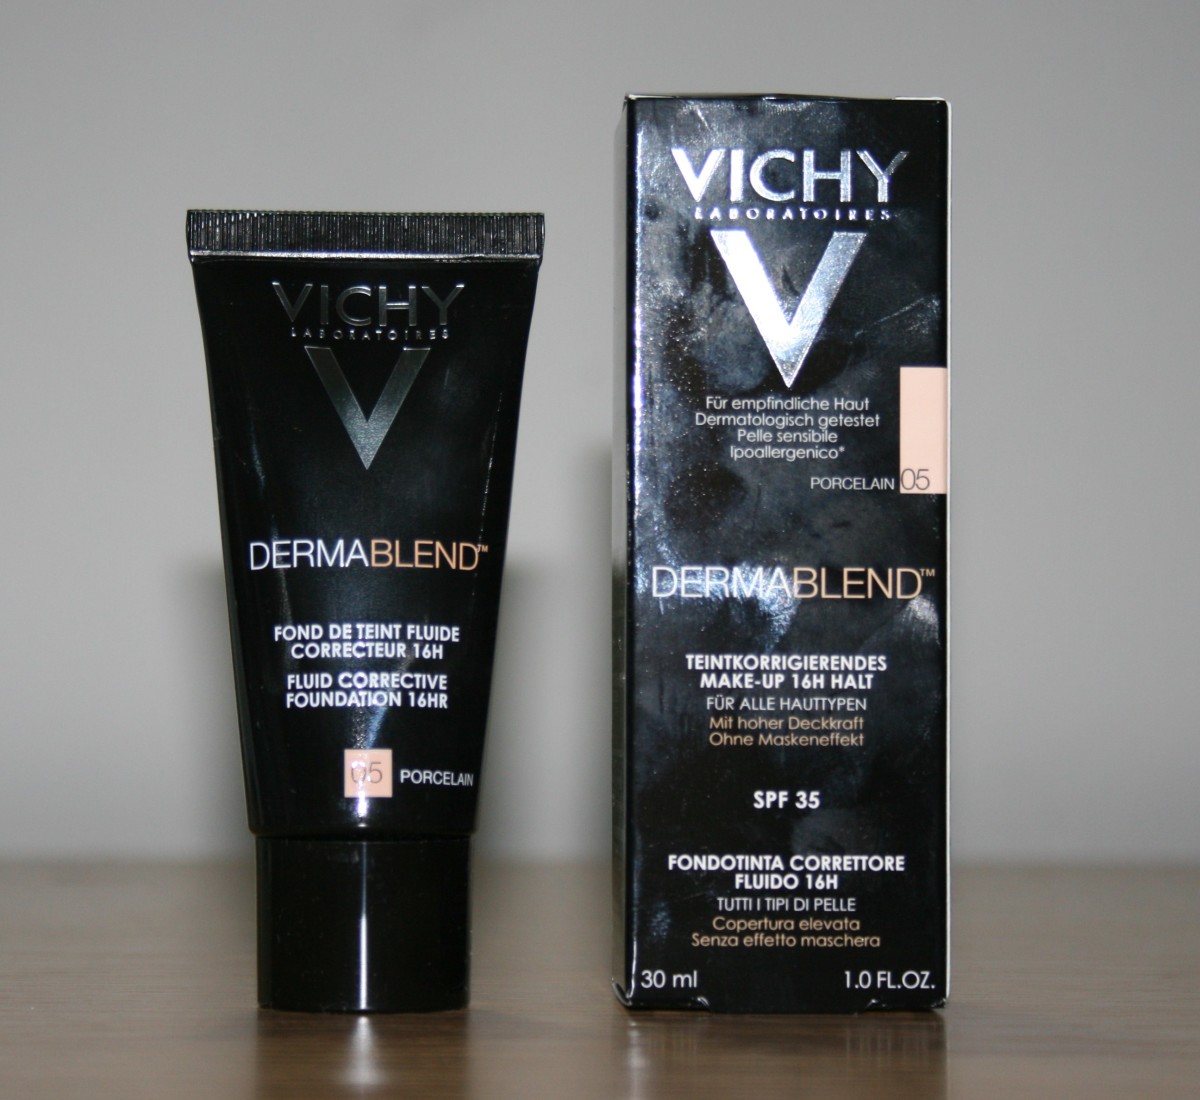 Vichy Dermablend New Shade Porcelain 05 (Comparison Swatches)